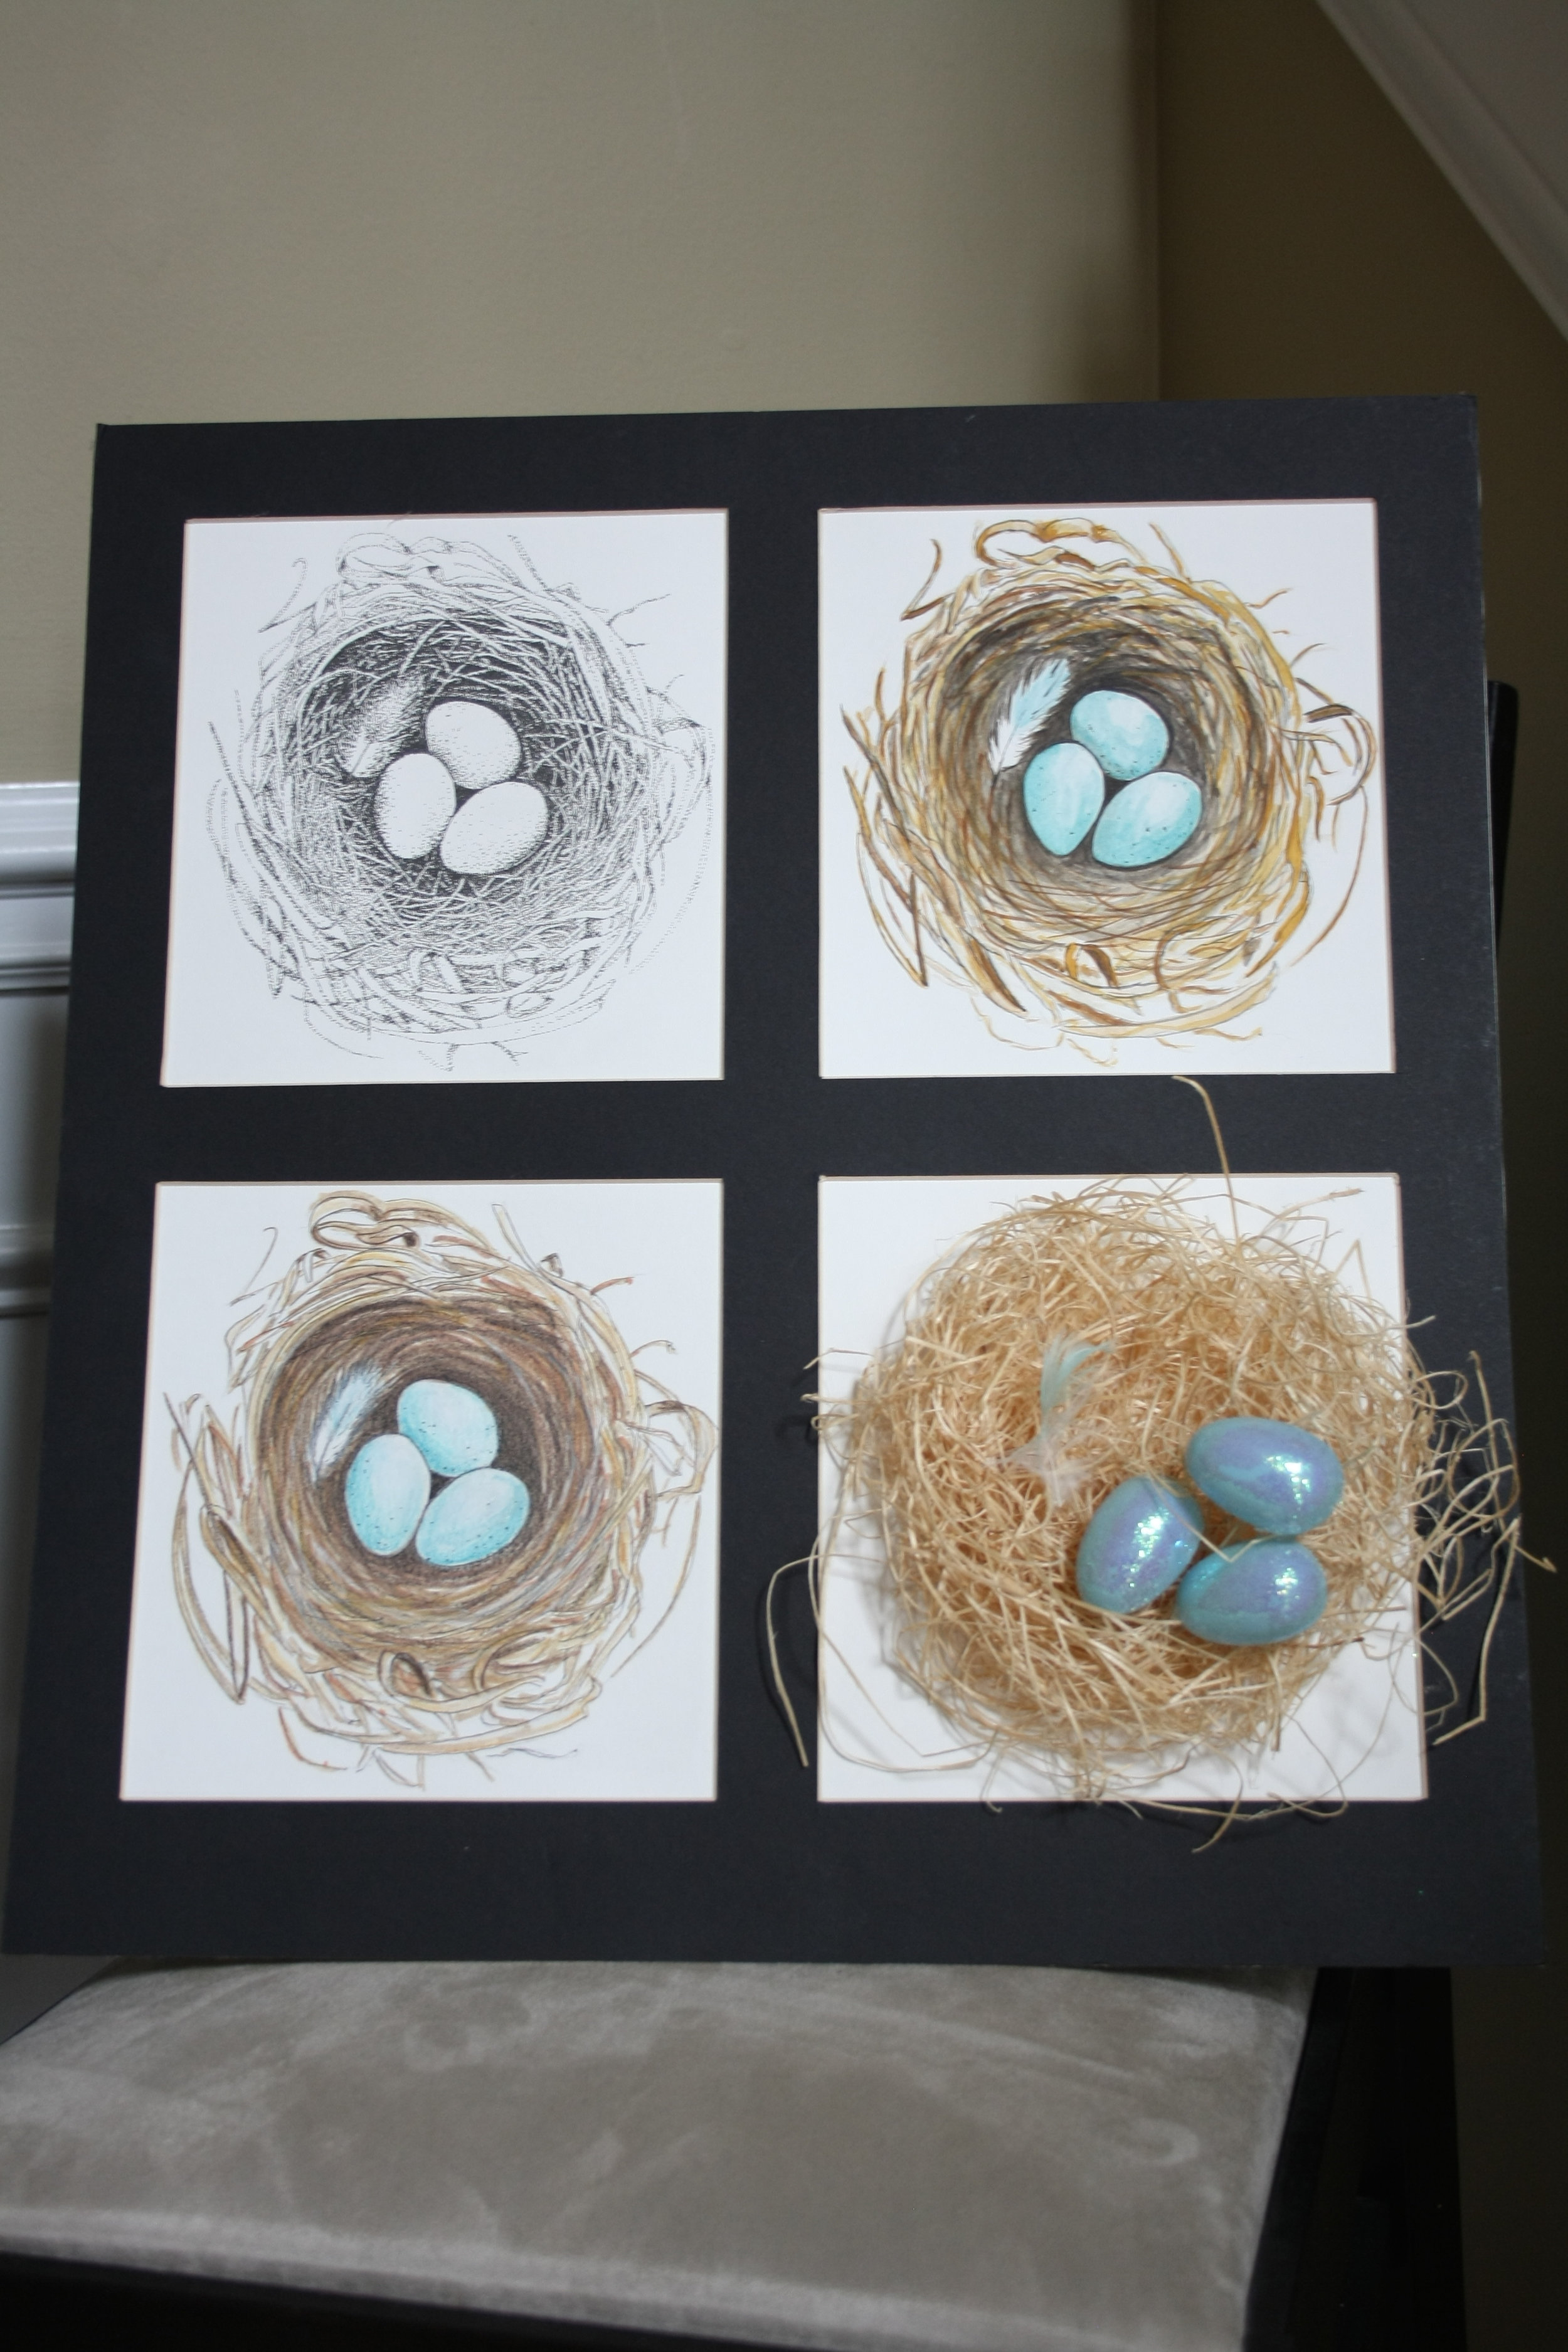 How to mat photos and art, Thrifty Decor Chick